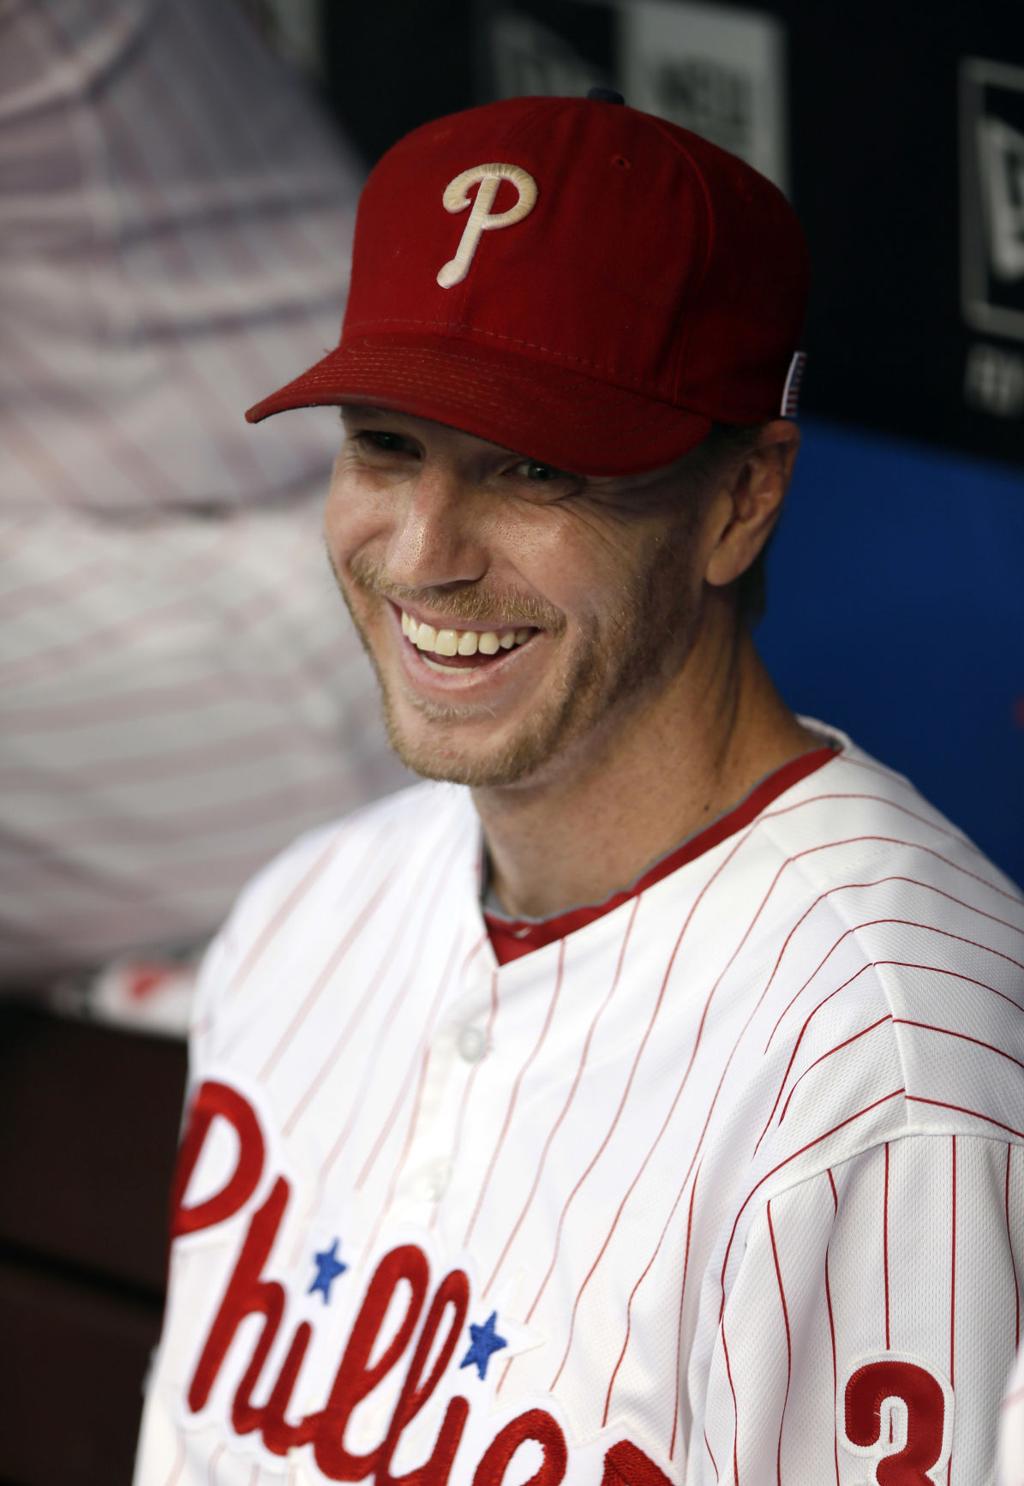 Two-time Cy Young Award winner Roy Halladay killed in sea crash, Red Sox